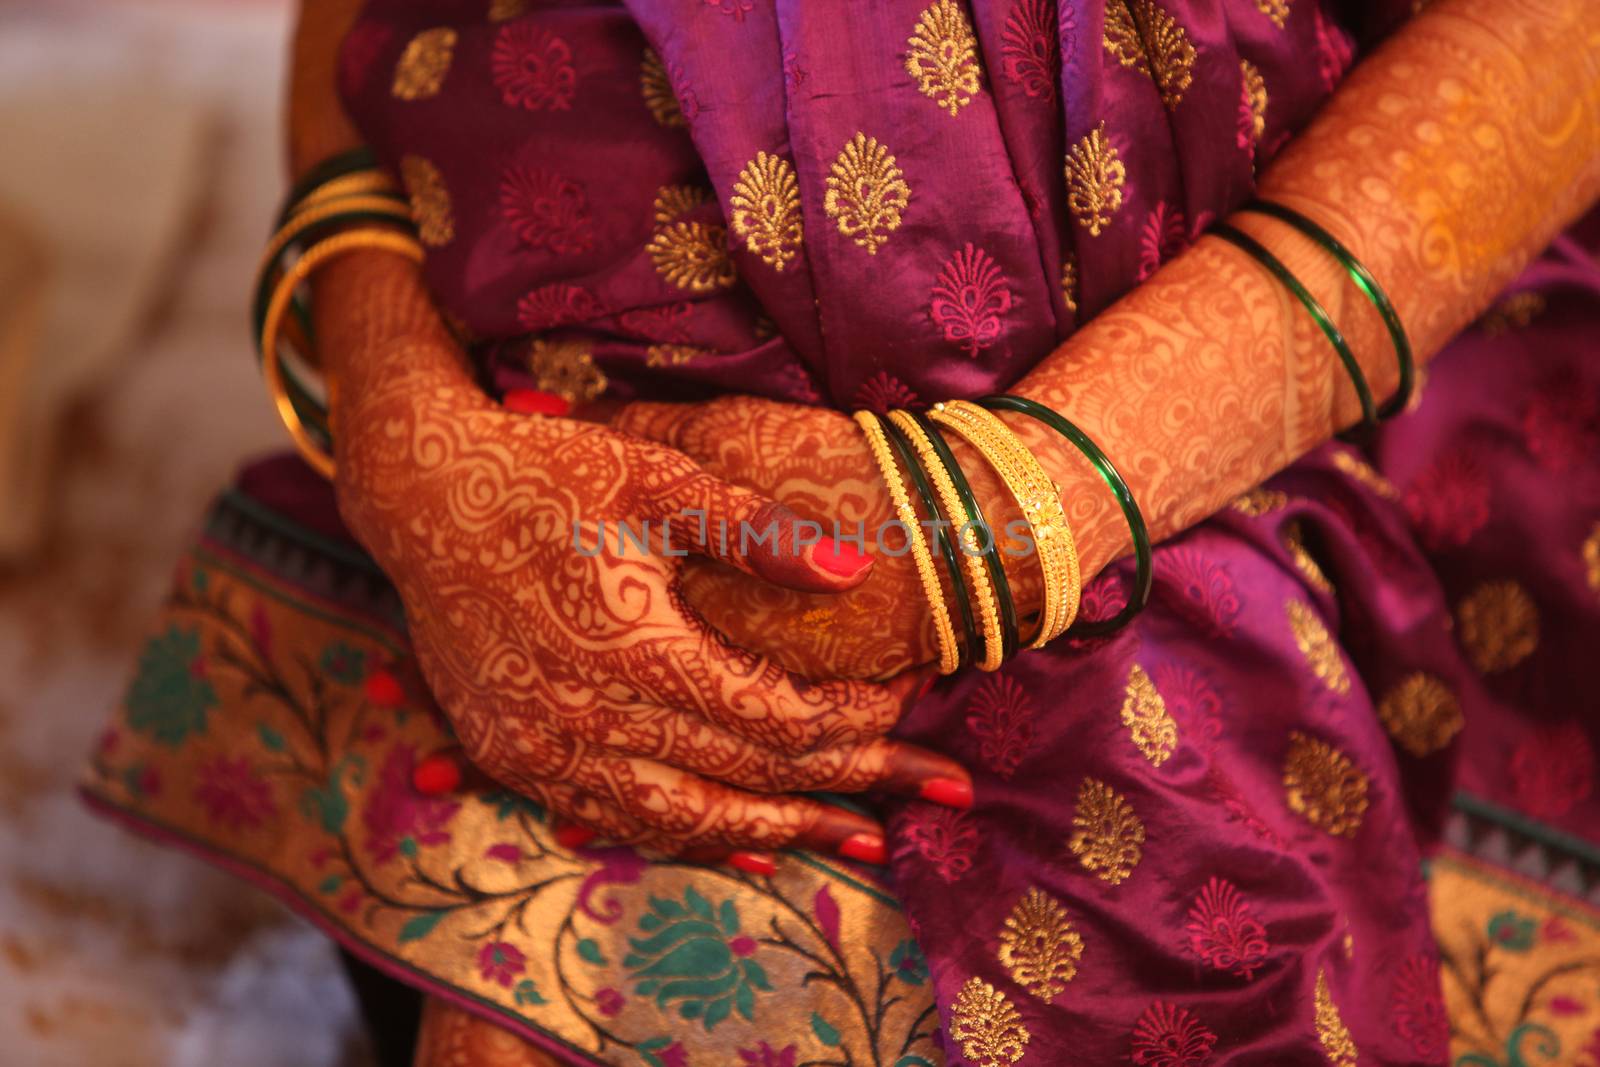 A metaphorical image of a waiting Indian bride with traditional attire.